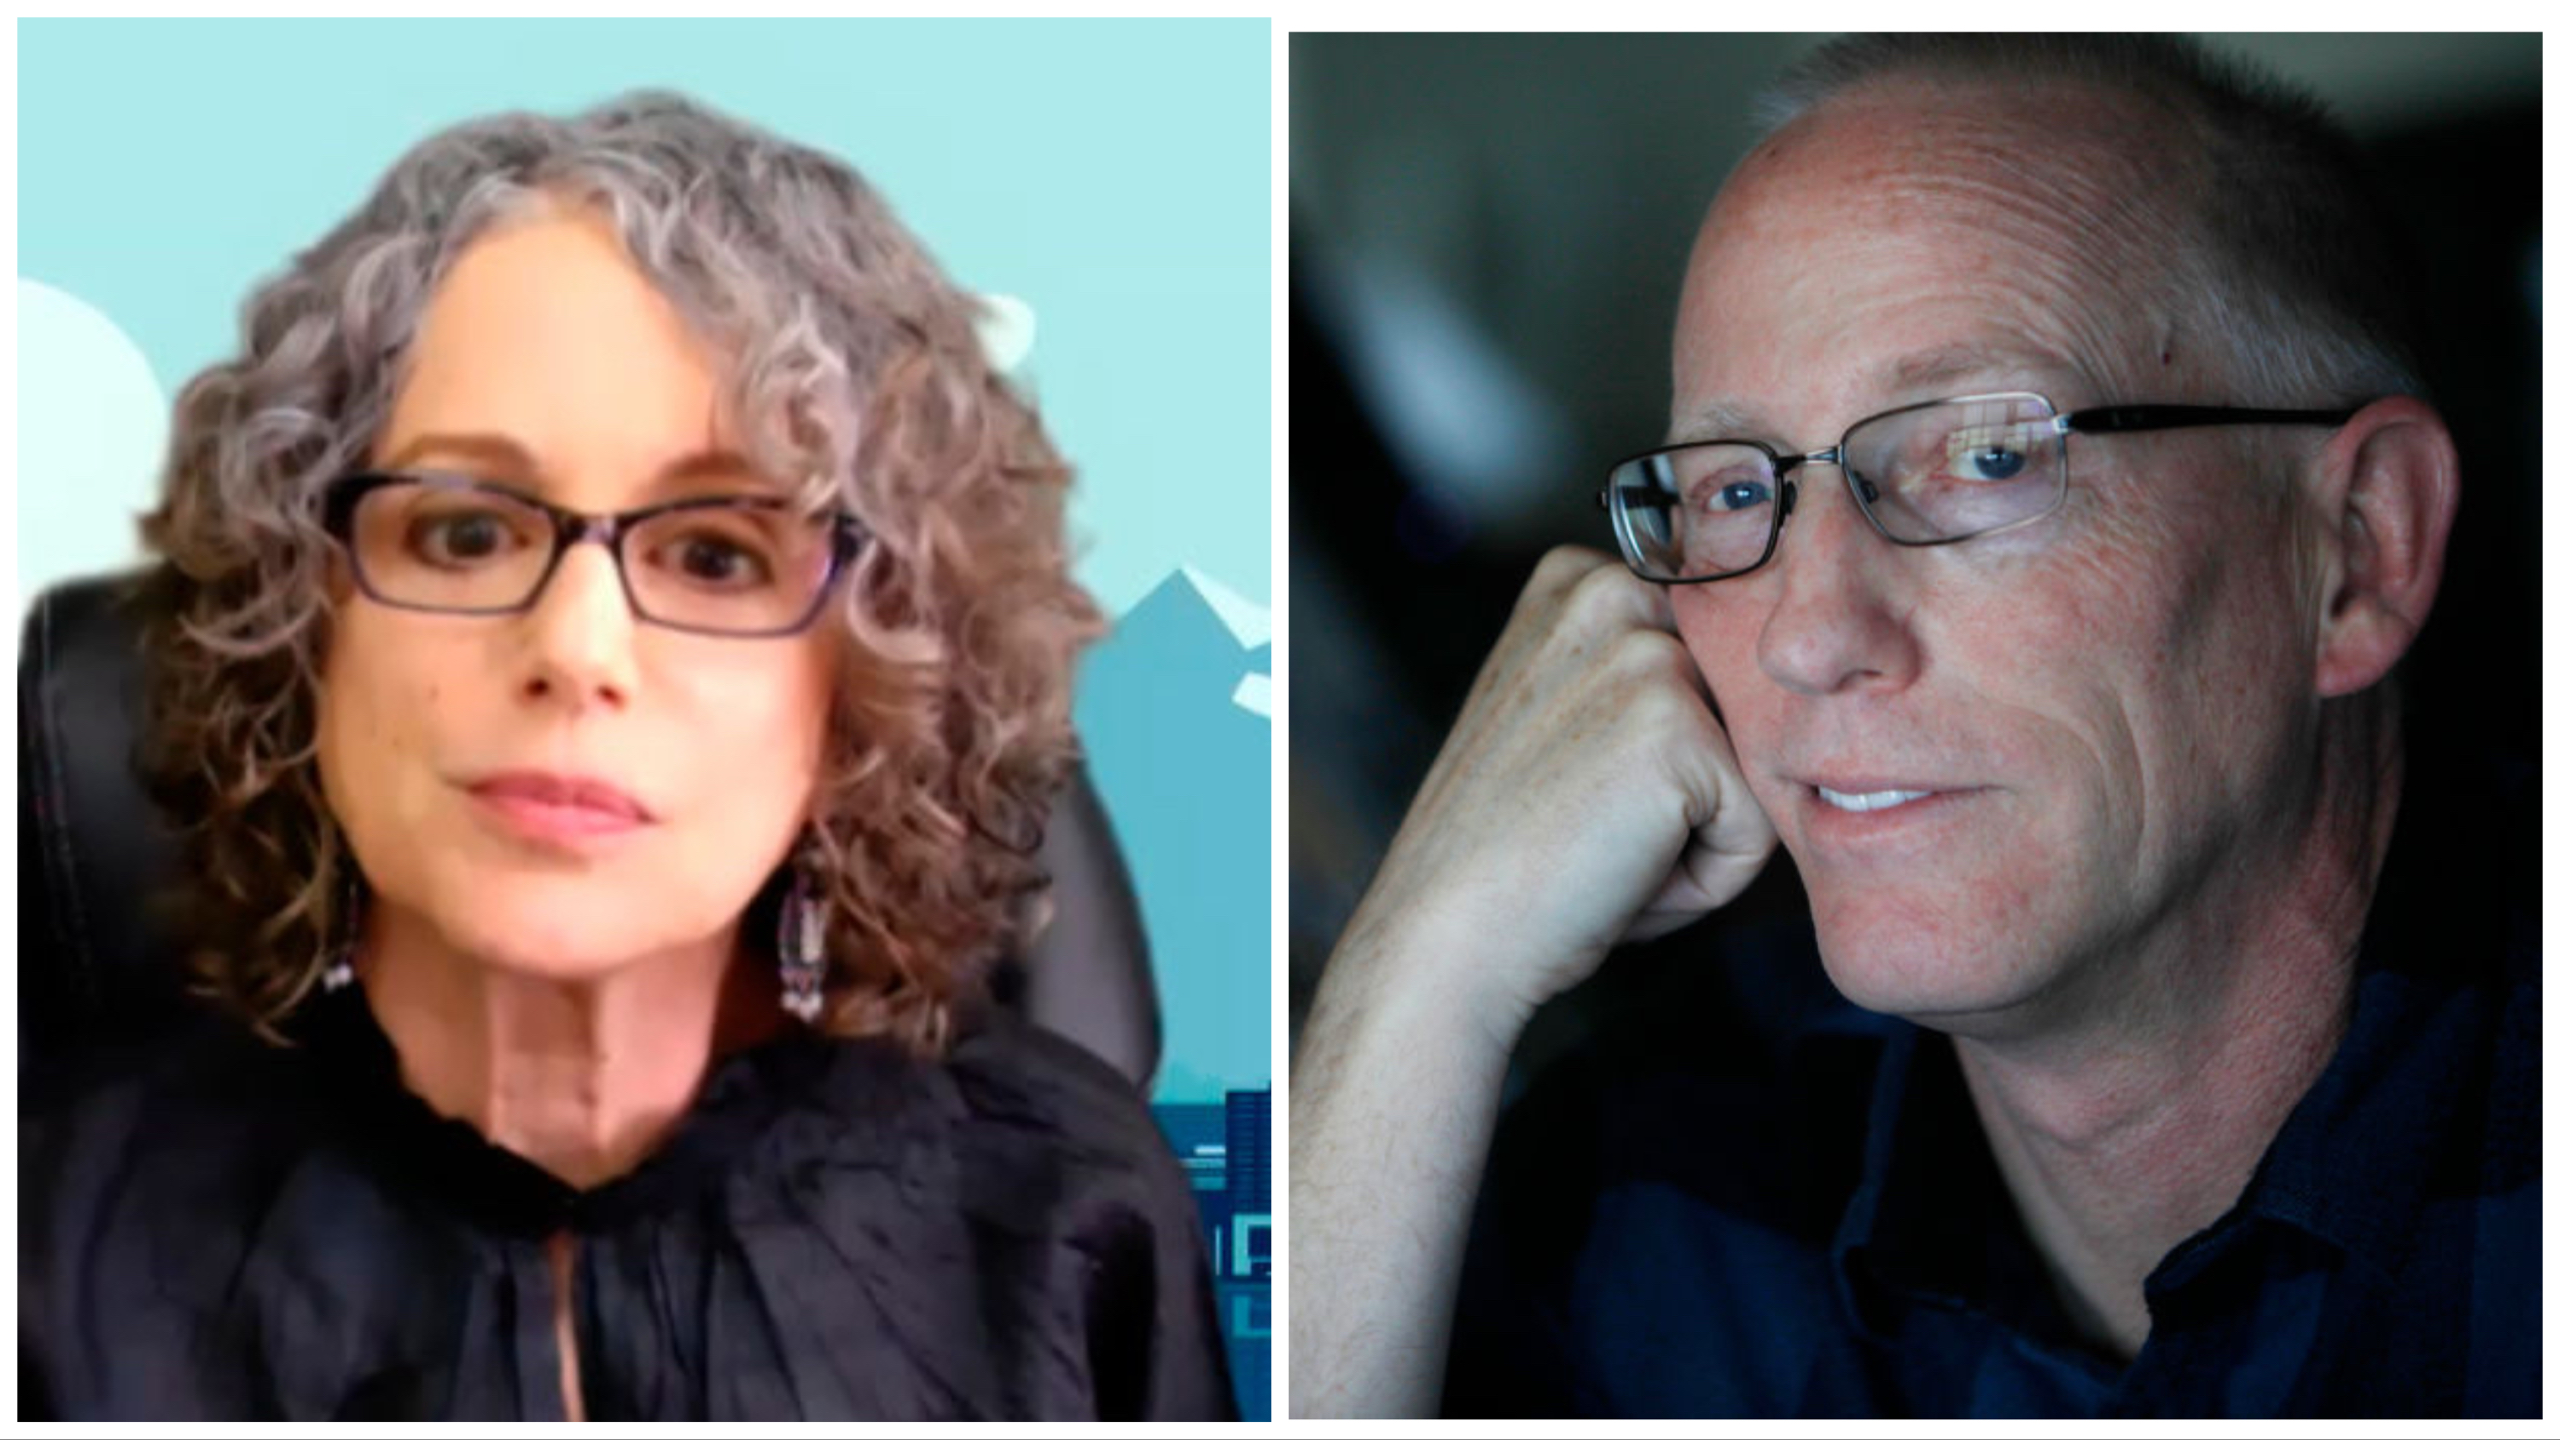 ‘White Fragility’ Author Champions Segregation. ‘Dilbert’ Creator Lost Career For Saying The Same Thing.